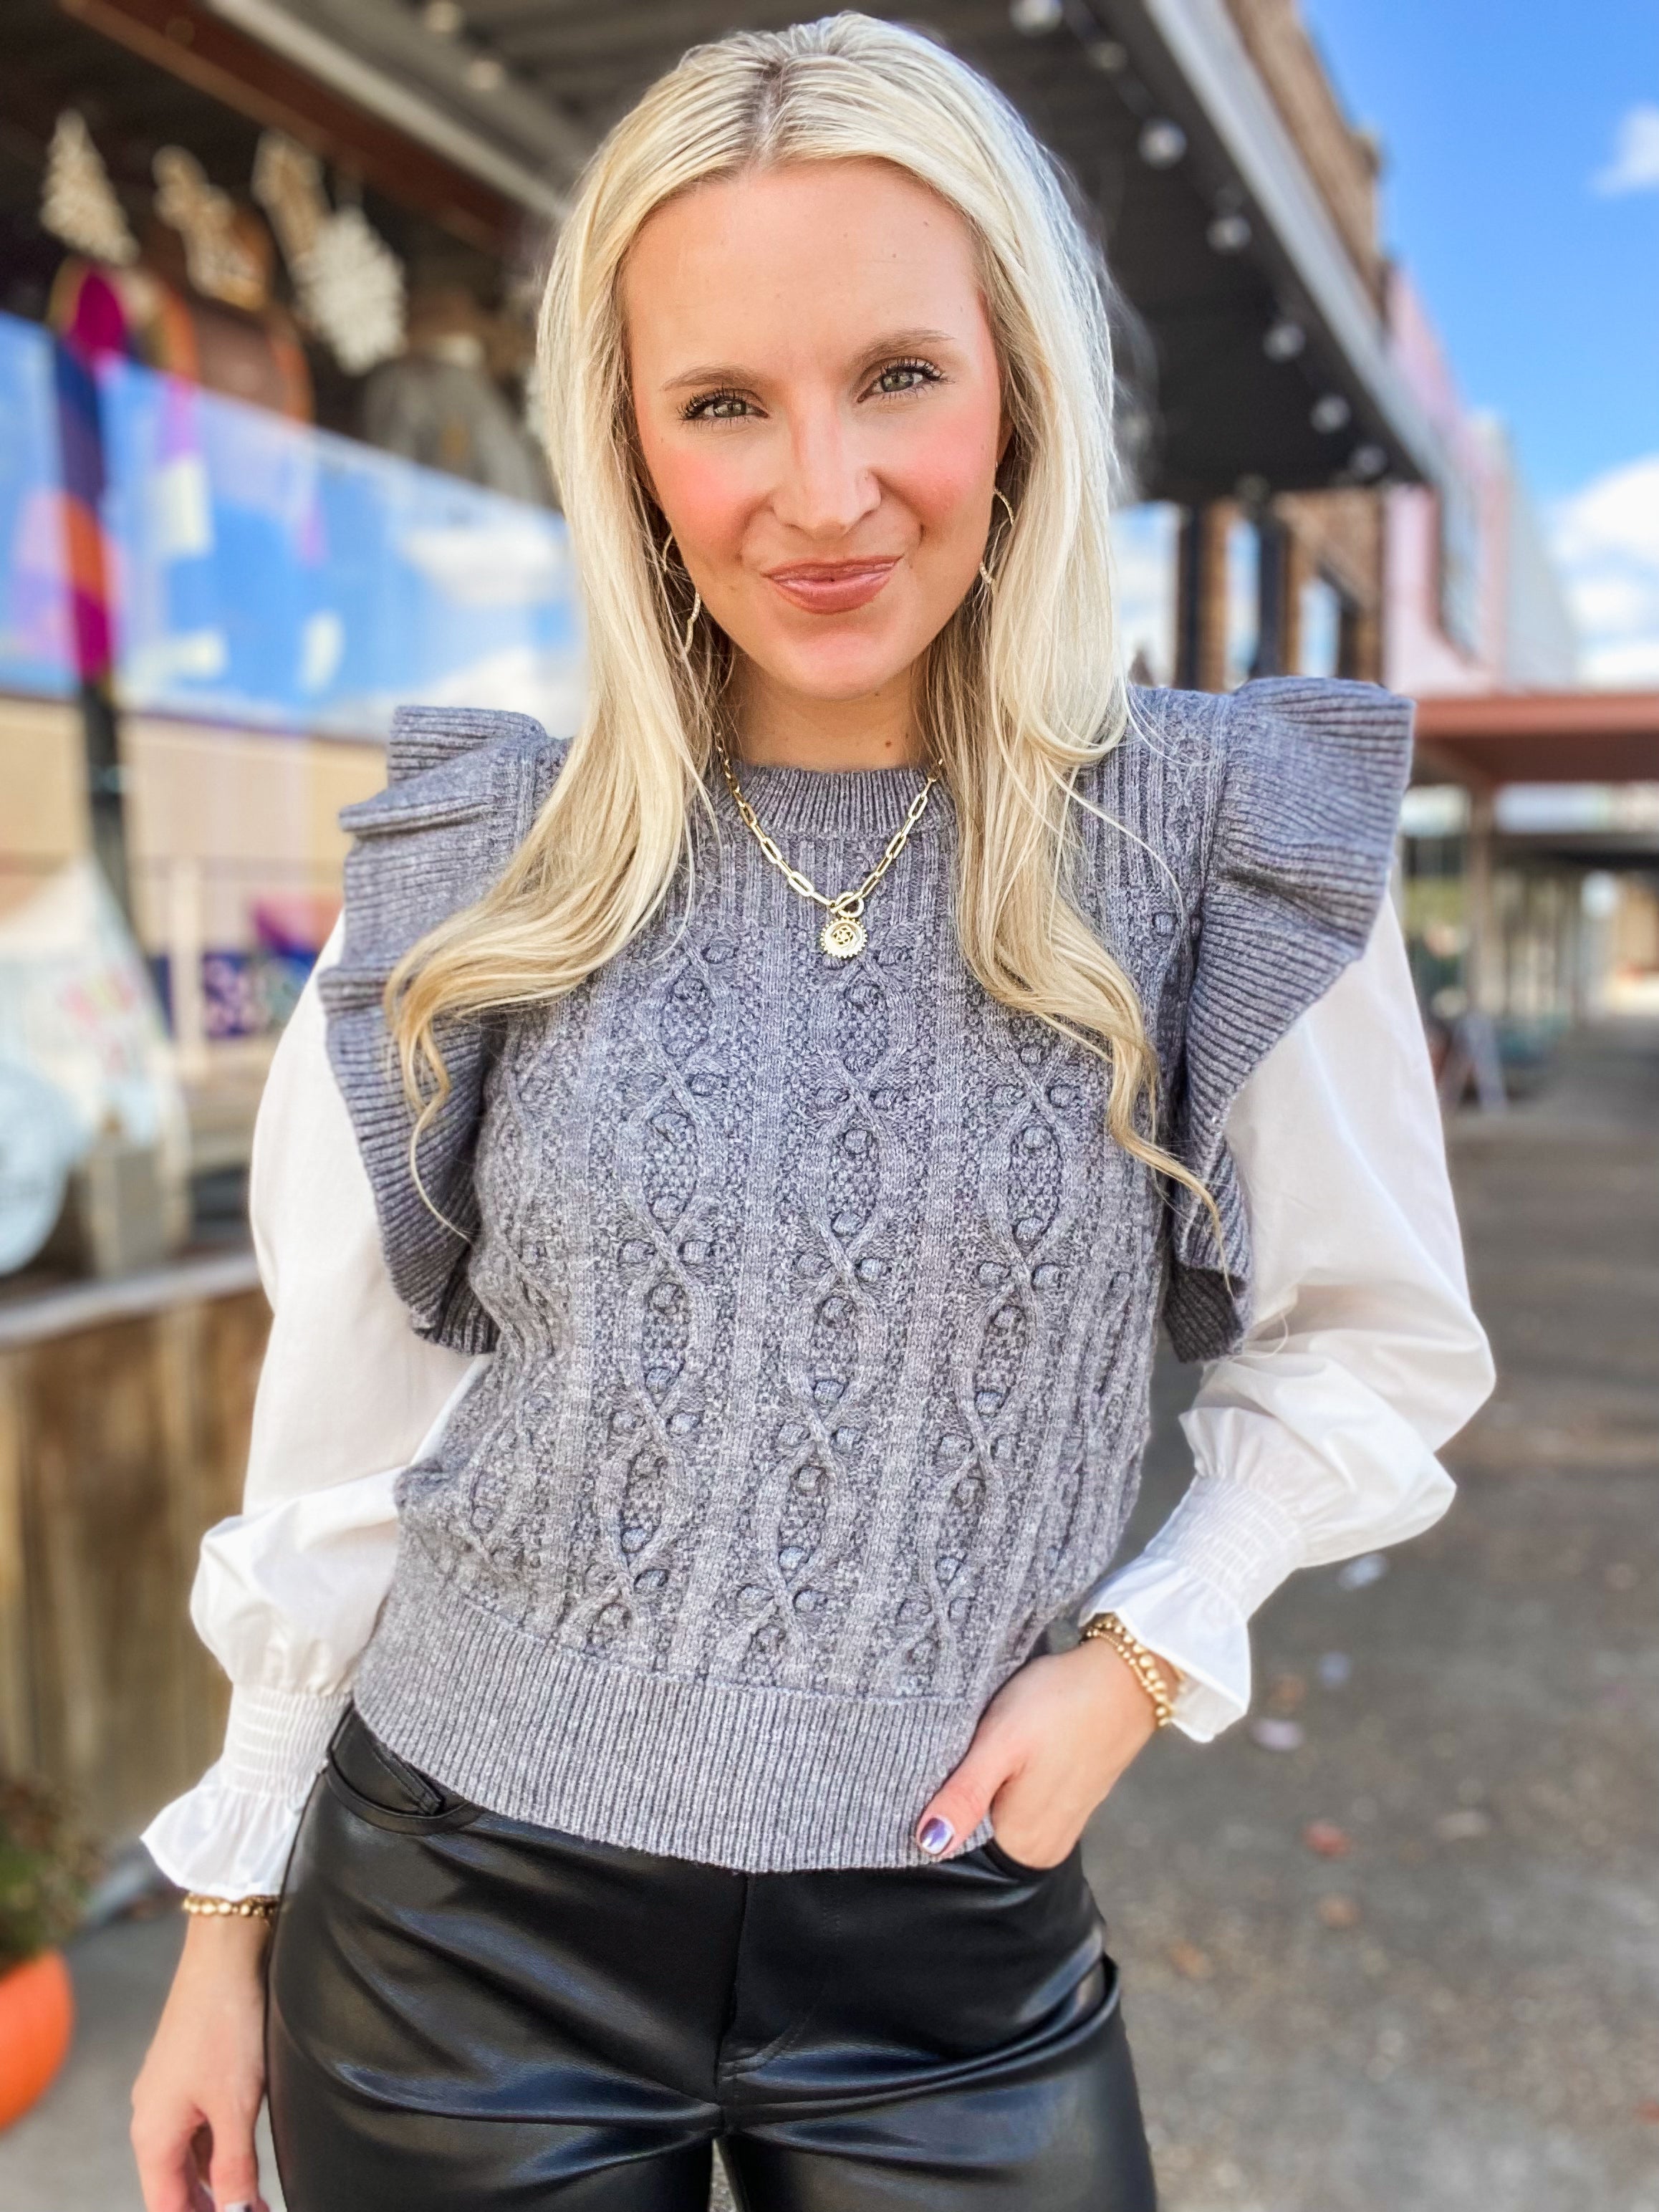 Making It About Gray Sweater Vest Blouse